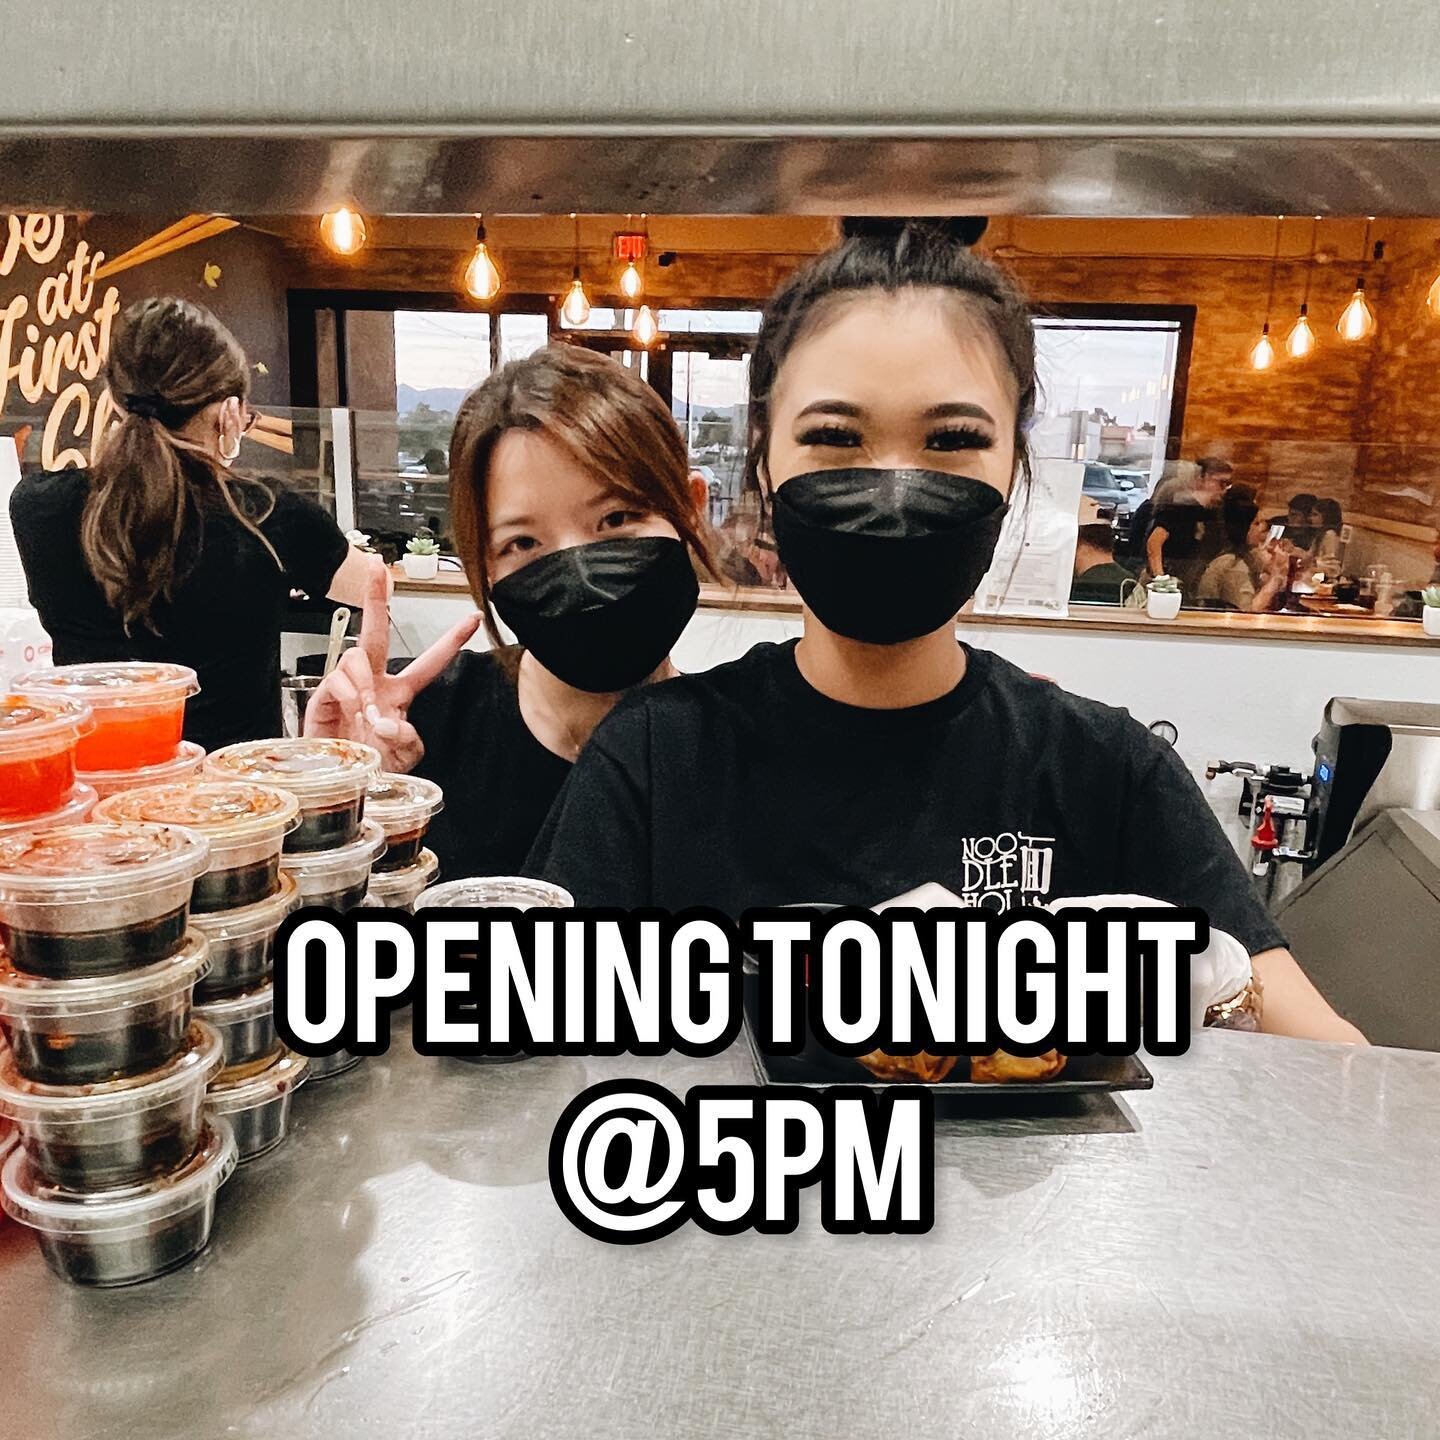 Both locations are back open for dinner tonight @ 5pm!

We&rsquo;ve definitely missed everyone and can&rsquo;t wait to see what everyone orders! ✌️

#noodleholicstucson #tucson #arizona #tucsonlocal #tucsoneats #tucsonfood #azlocal #noodles #takeout 